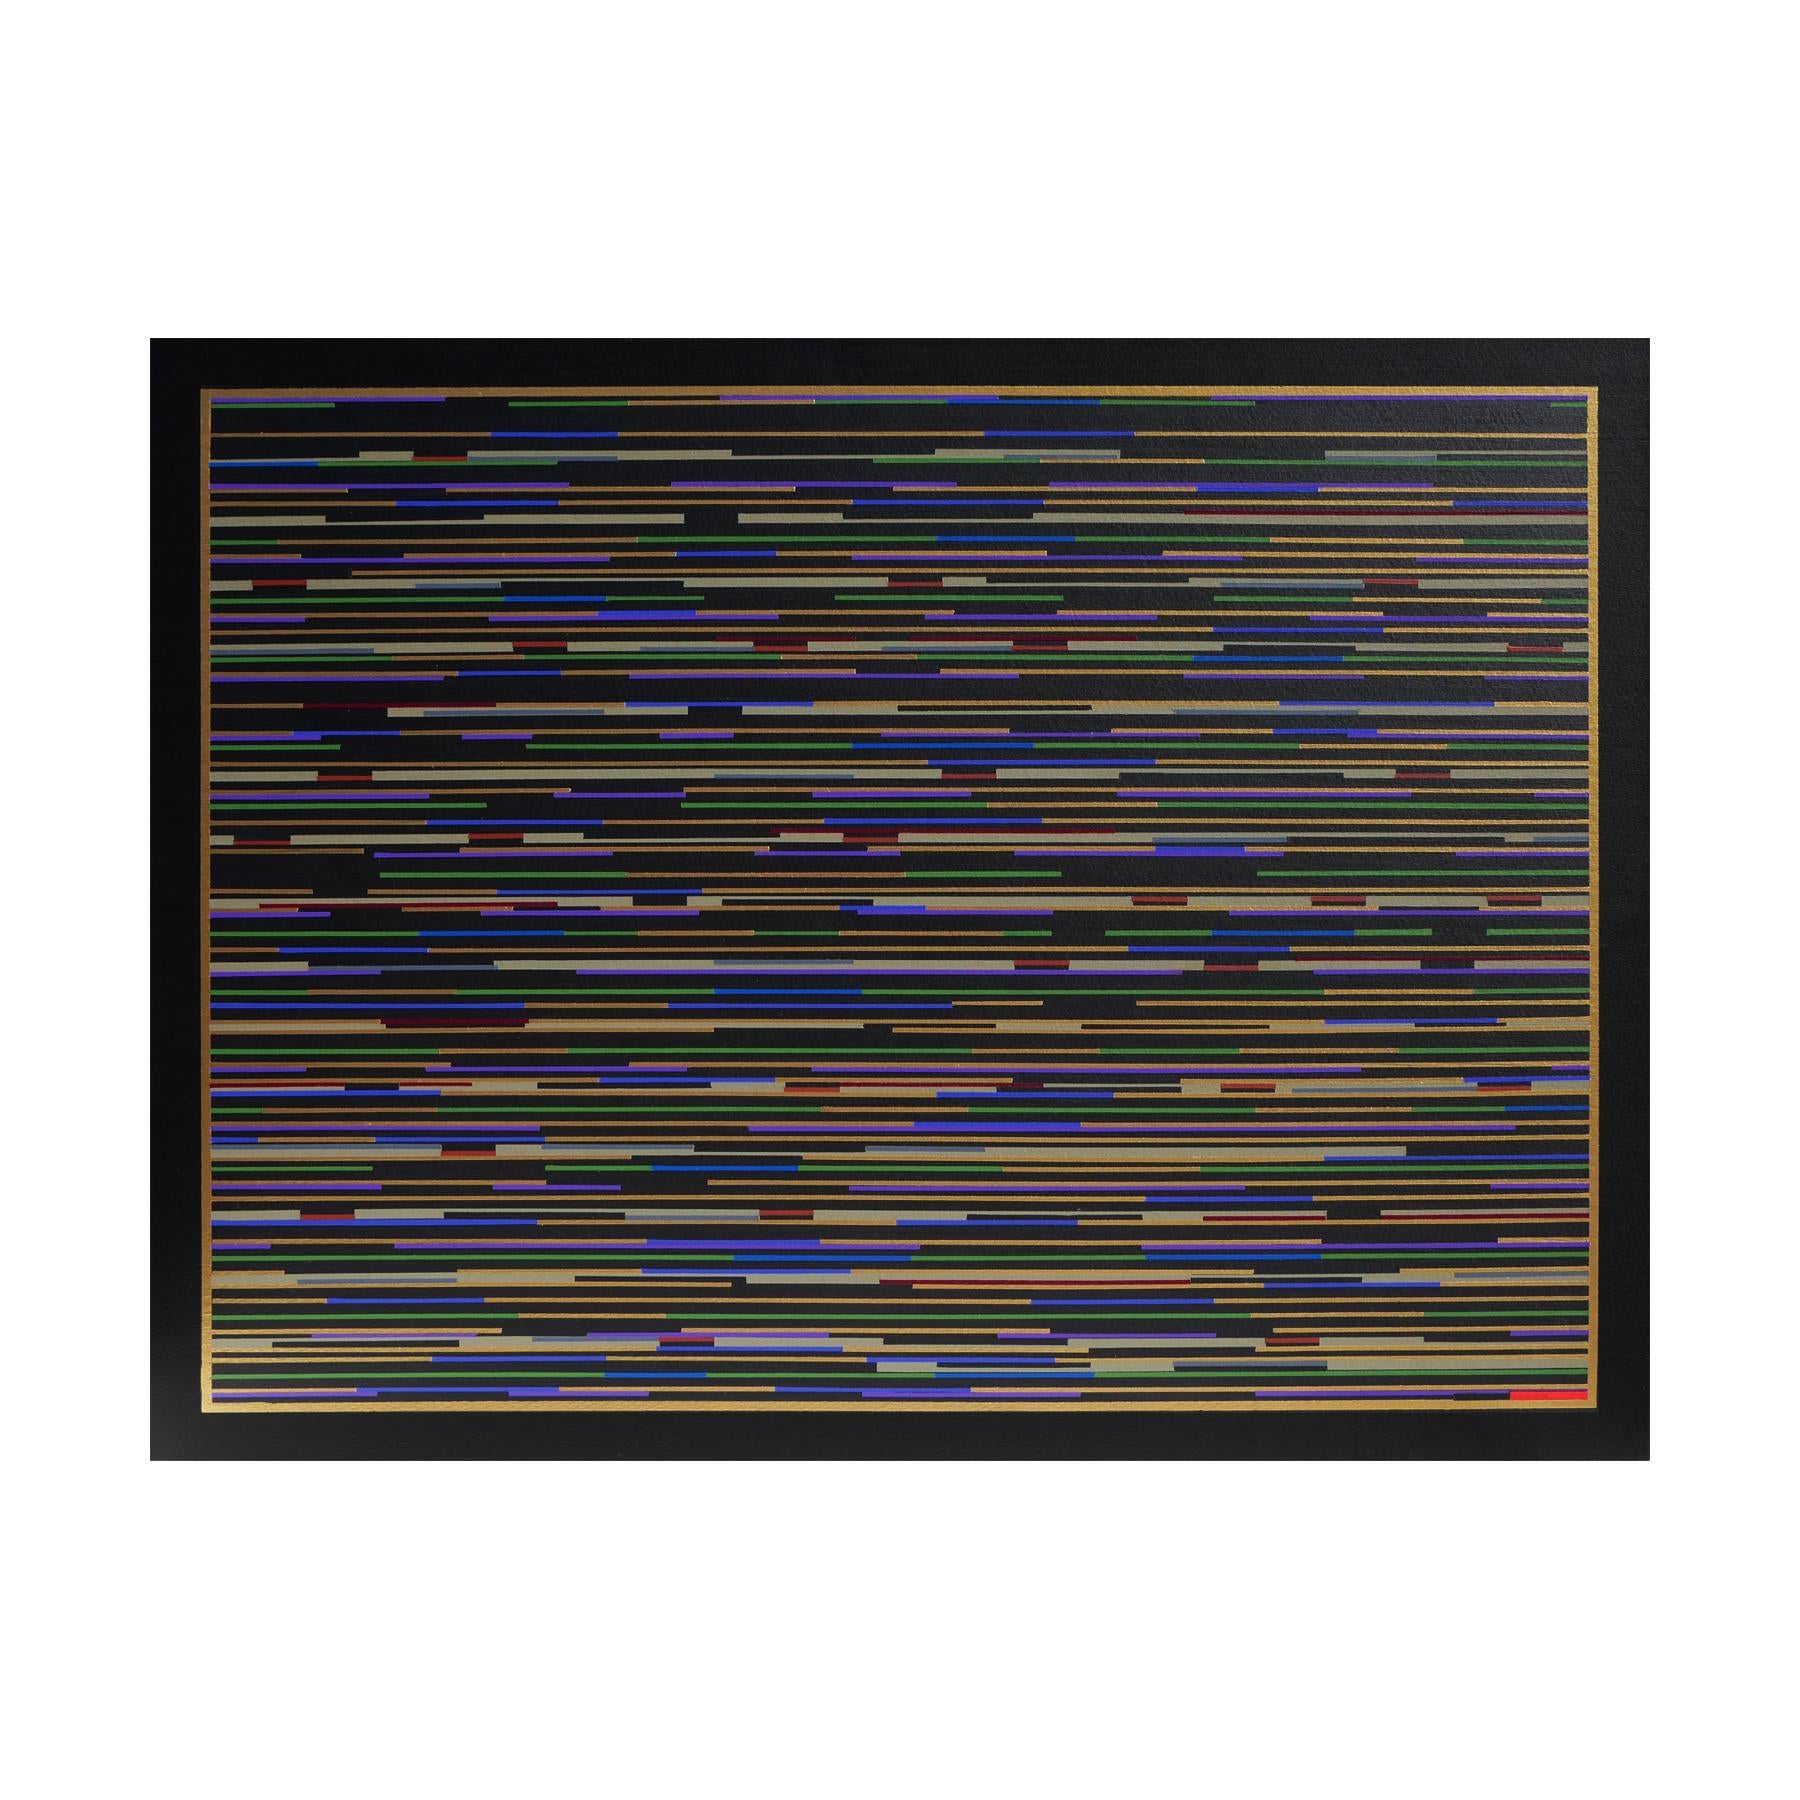 Contemporary abstract geometric painting by artist Mark Byckowski. The work is featured in a series of paintings on a rag surface watercolor board. The work features horizontal lines with a variety of vivid colors of blue, and yellow painted on a